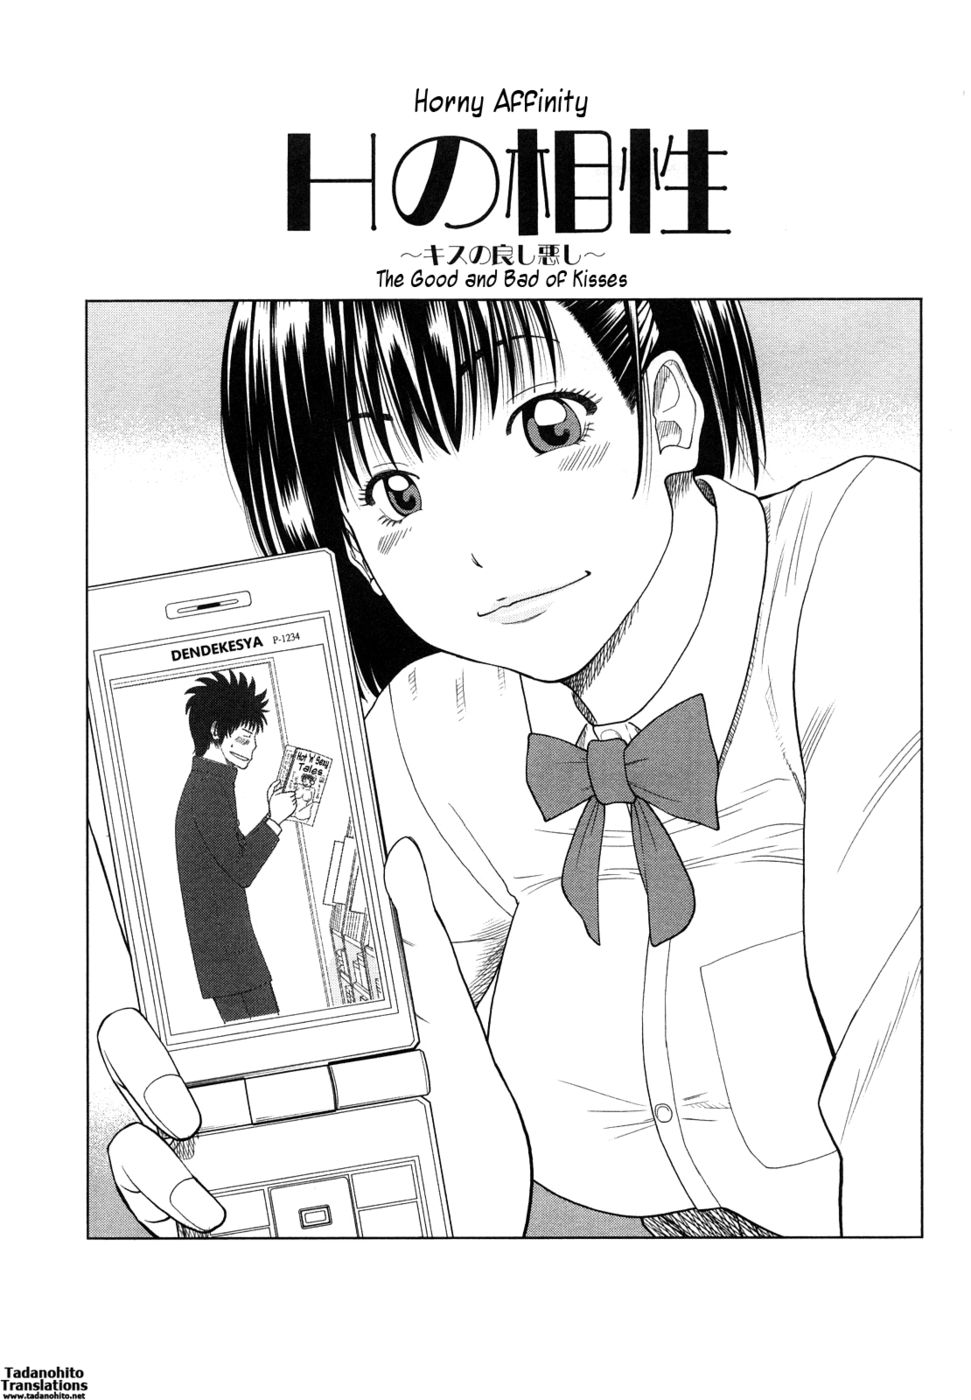 Hentai Manga Comic-Young Wife & High School Girl Collection-Chapter 9-Horny Affinity-The Good And Bad Of kisses-1